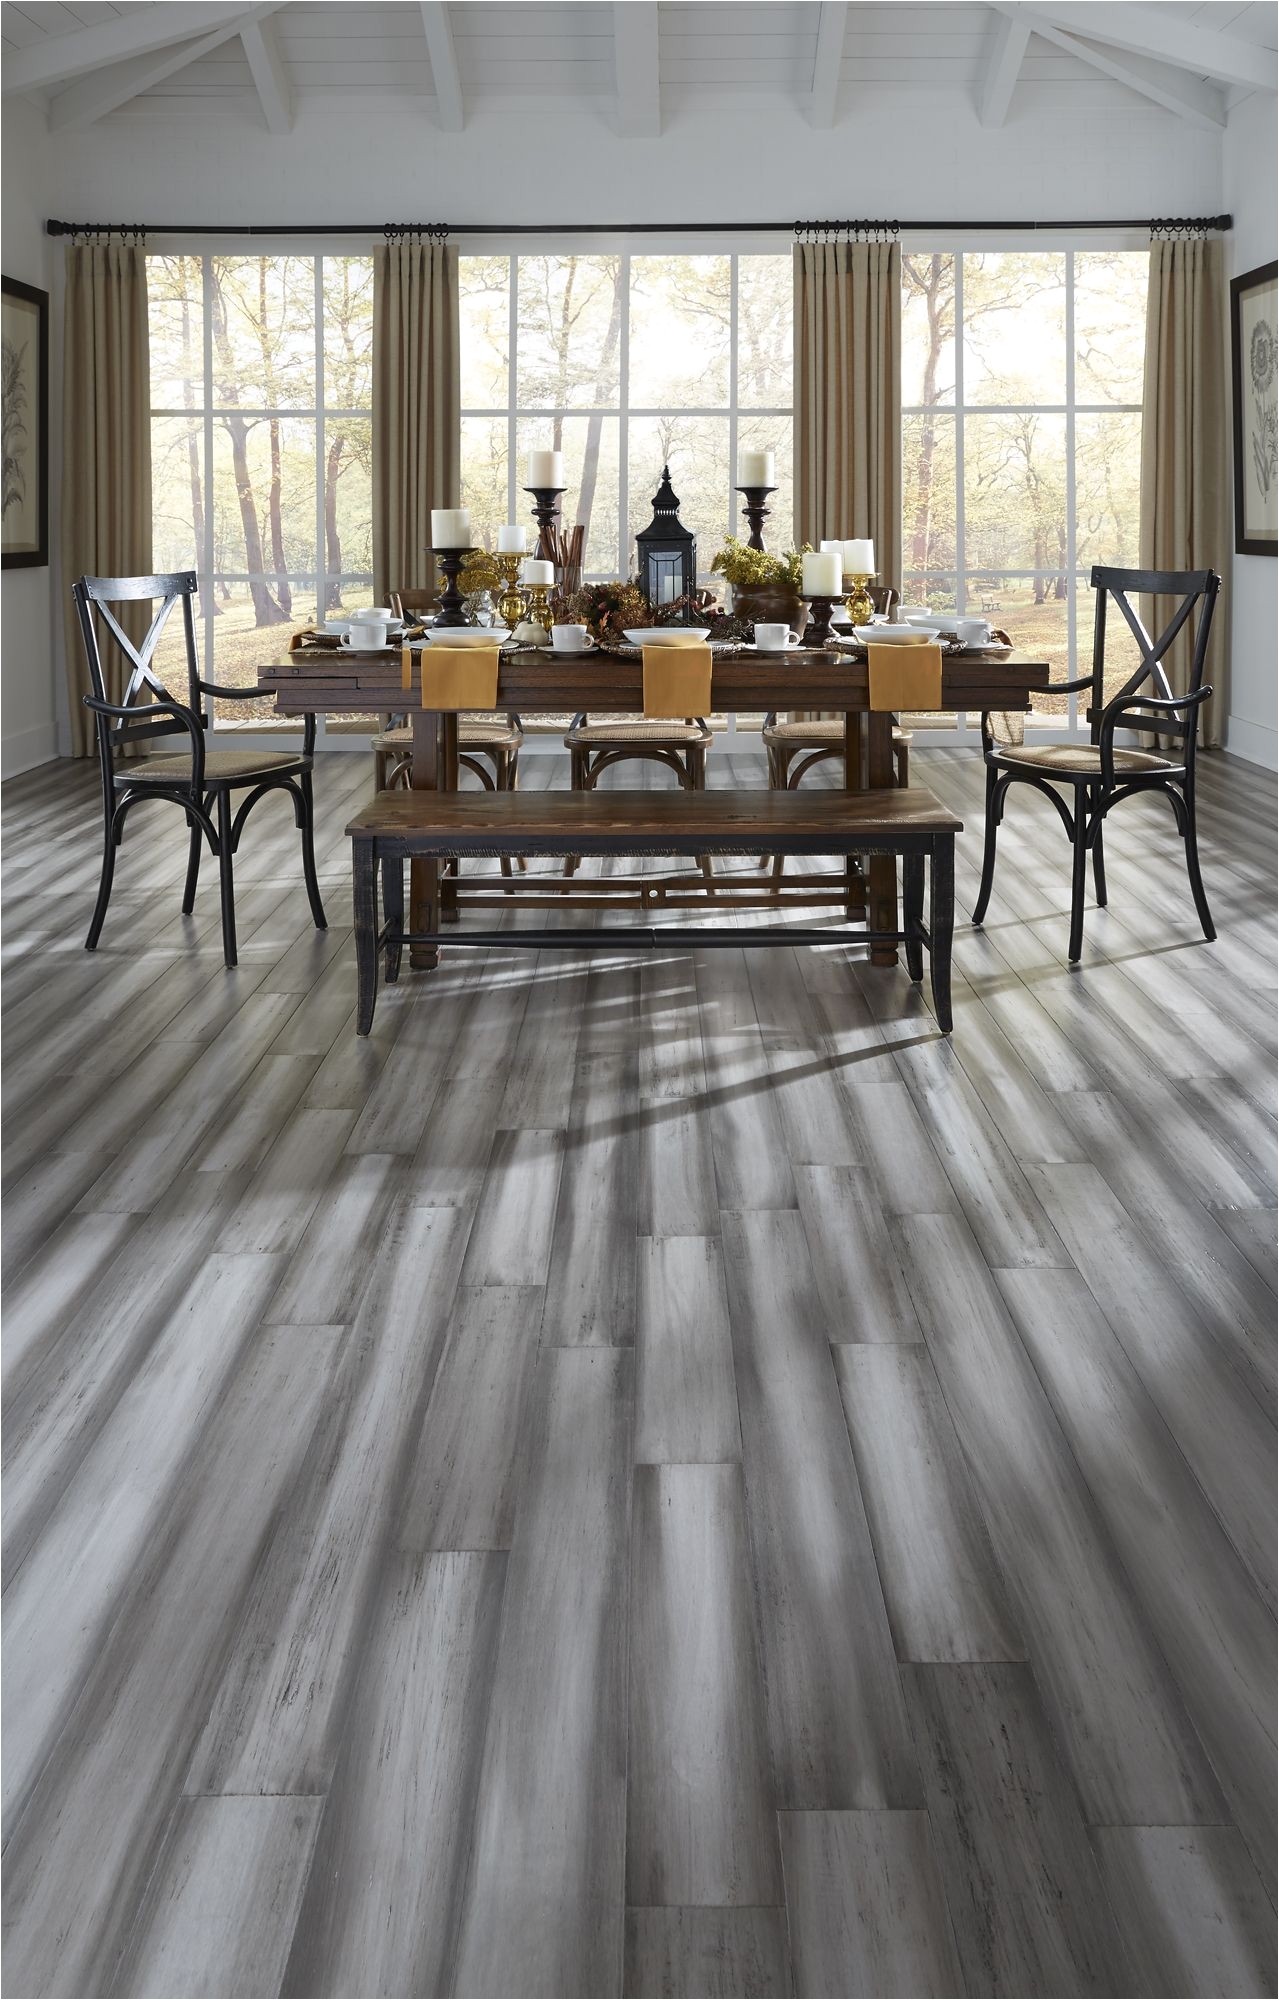 Bellawood Hardwood Floor Cleaner Home Depot Modern Design and Rustic Texture Pair Perfectly with the Stately